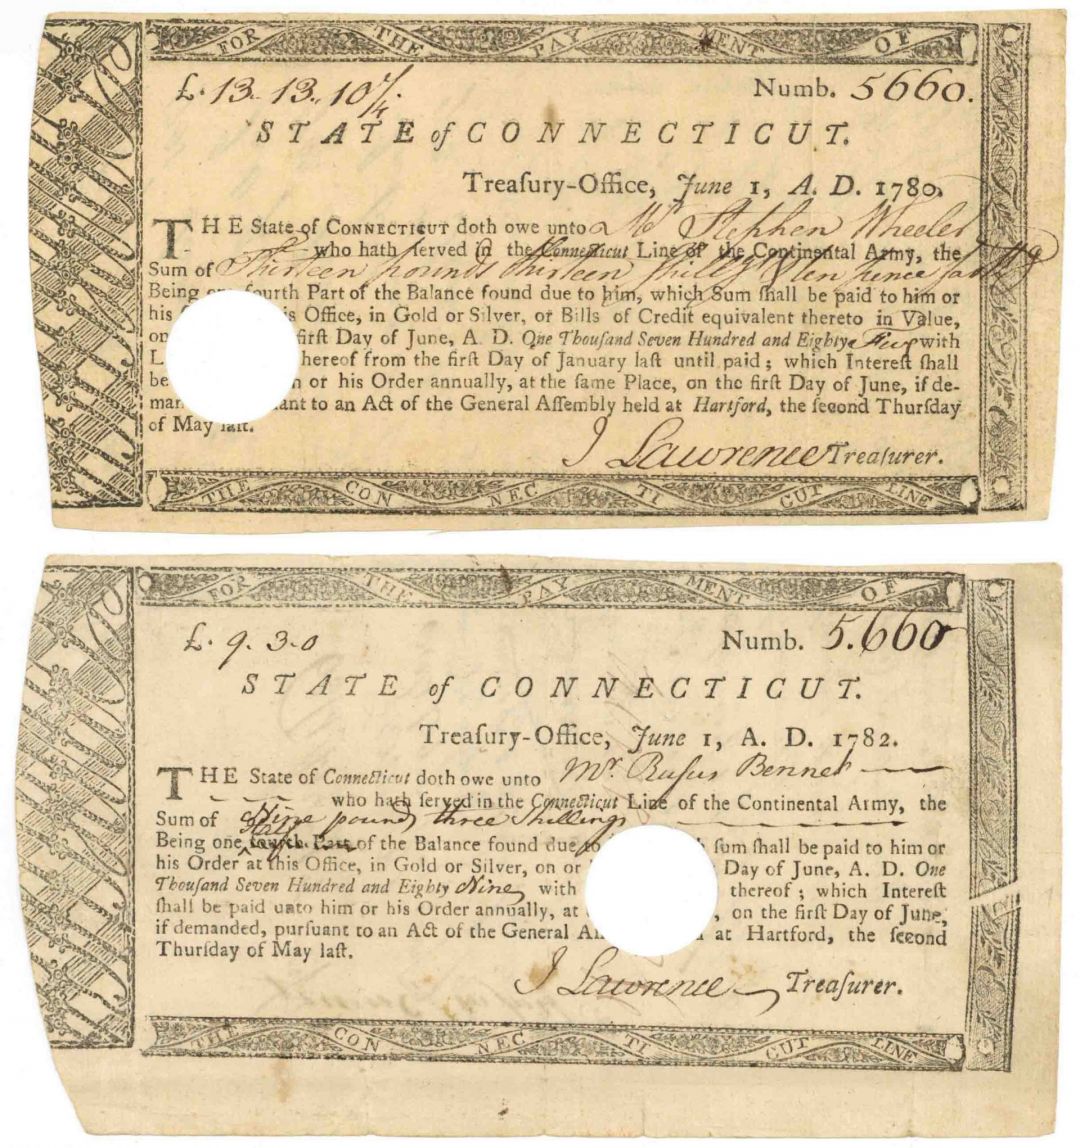 Pair of Matching Serial Number Connecticut Line Notes - Connecticut - American Revolutionary War - Very Rare to Find